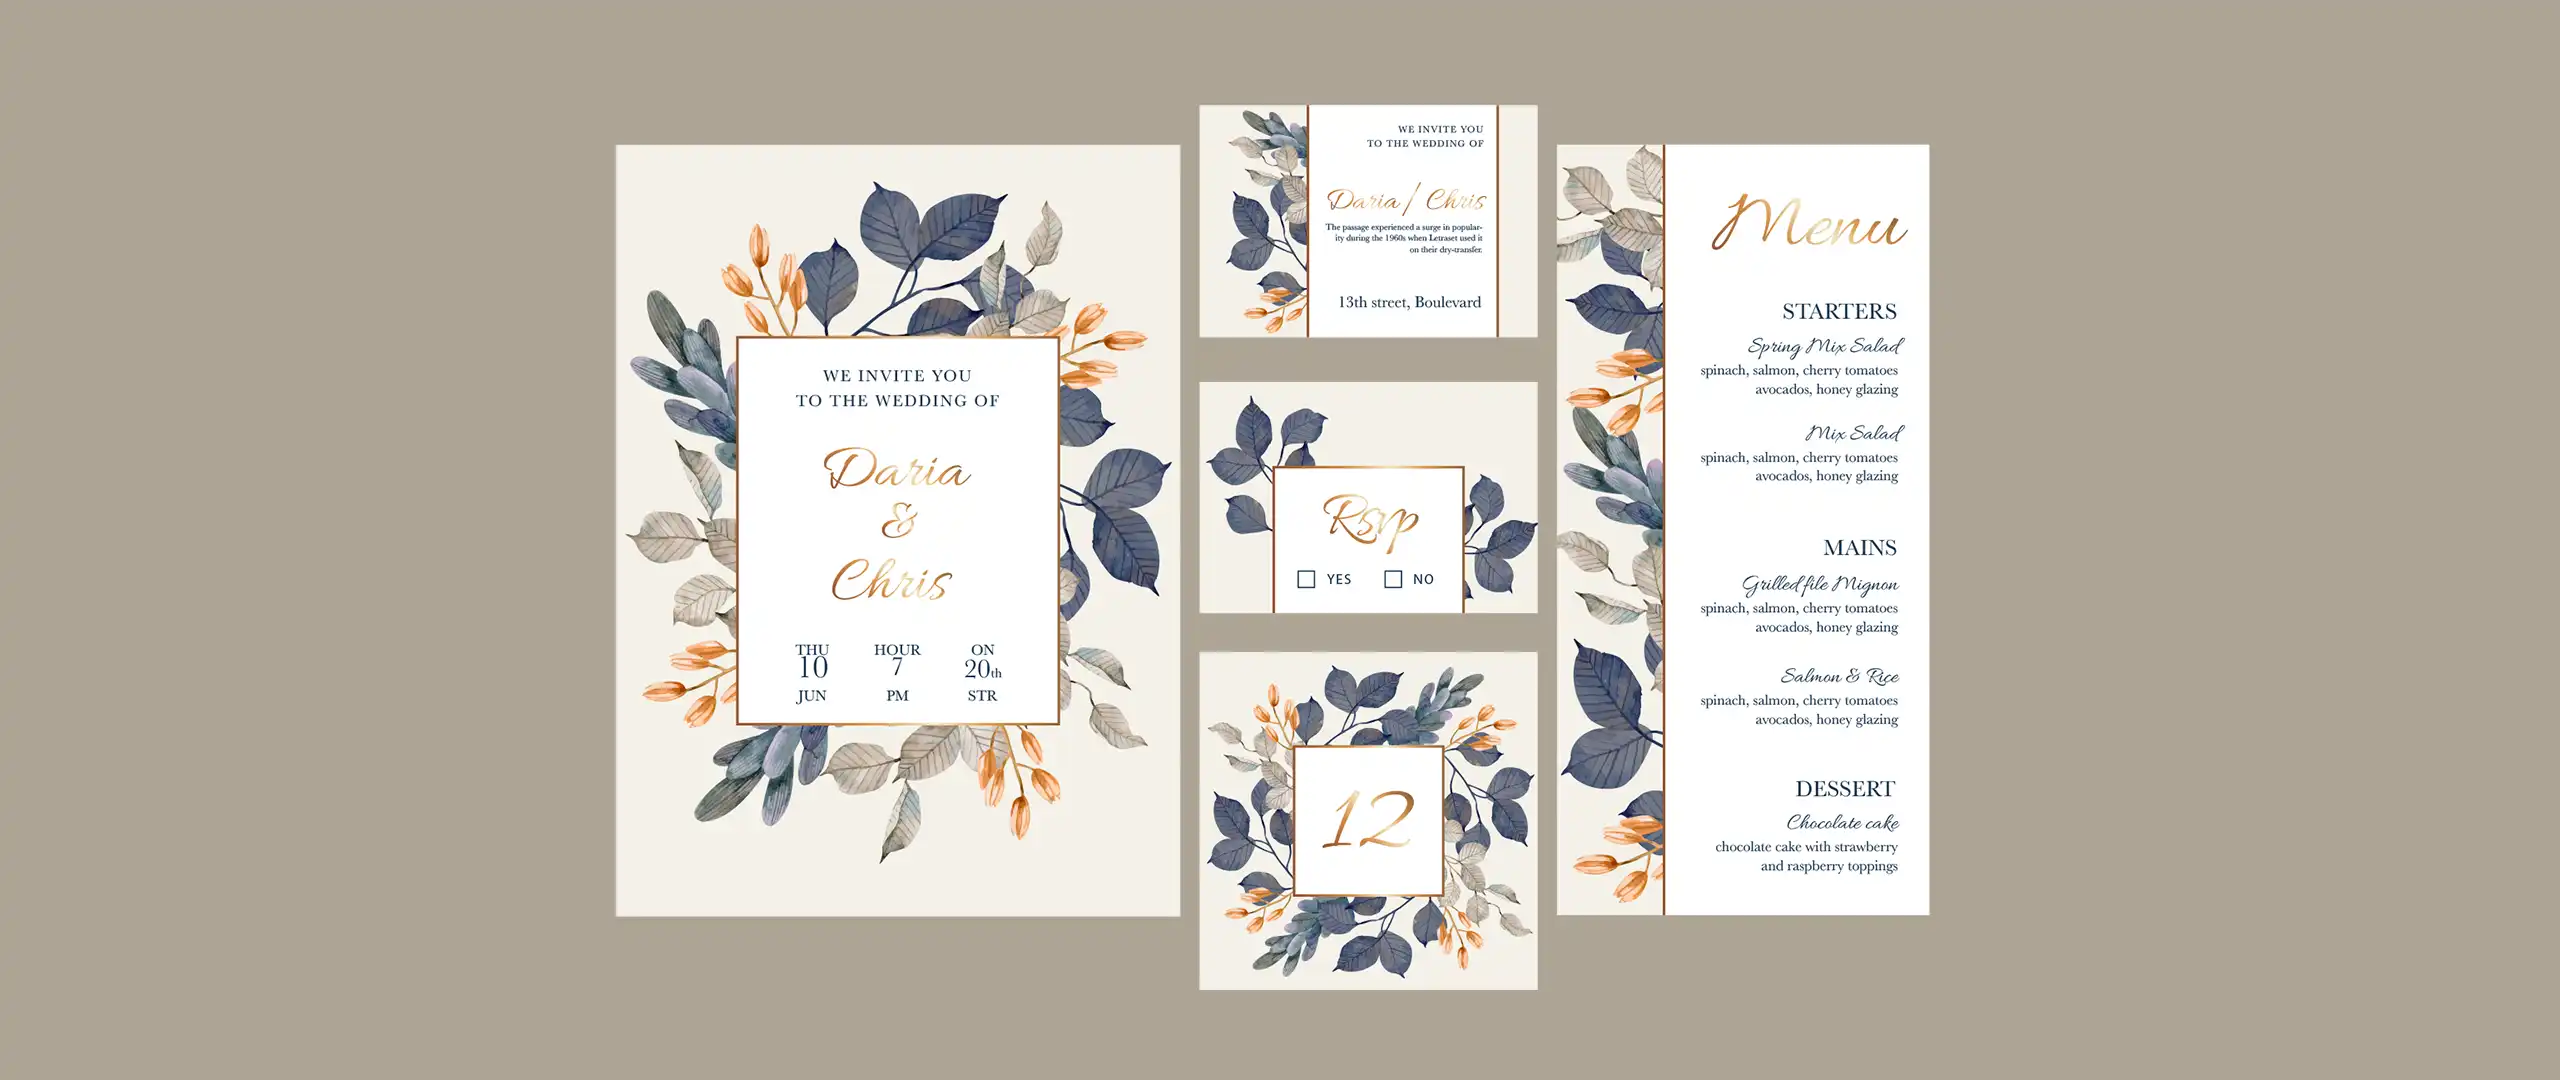 Distinctive Wedding Color Palettes For Your Big Day